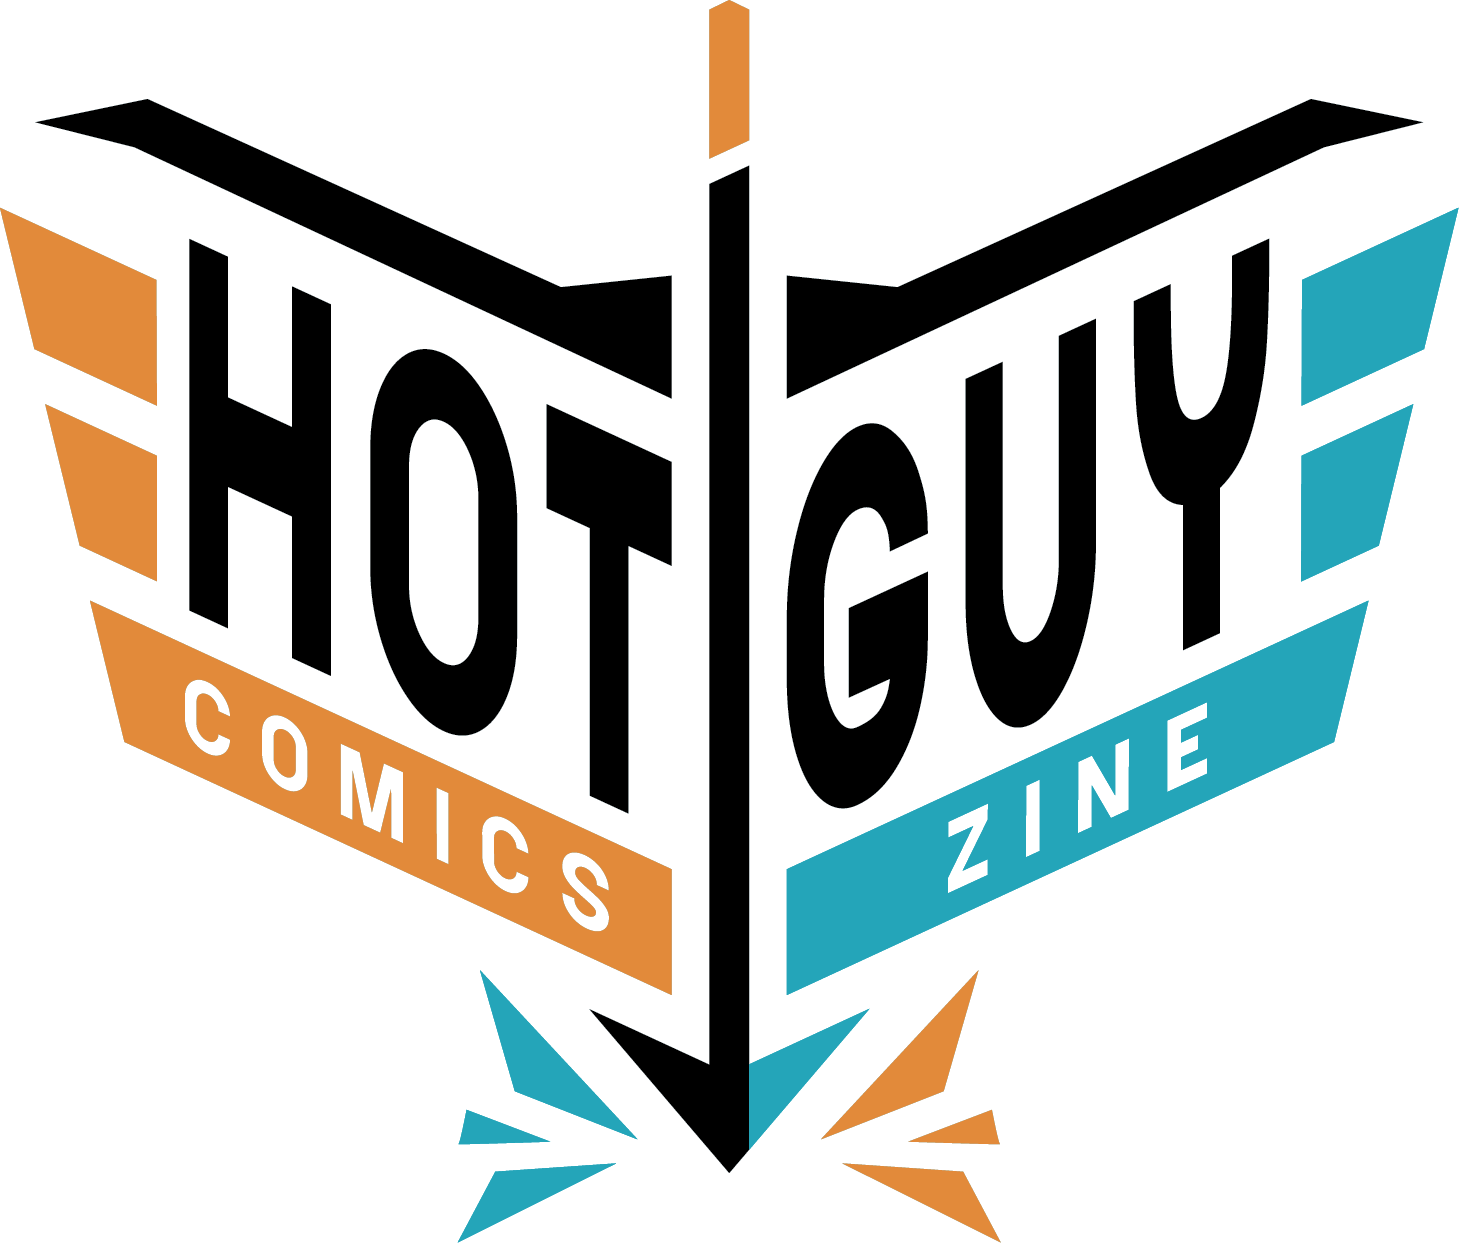 Logo that reads Hotguy Comics Zine in the shape of a bow and arrow.